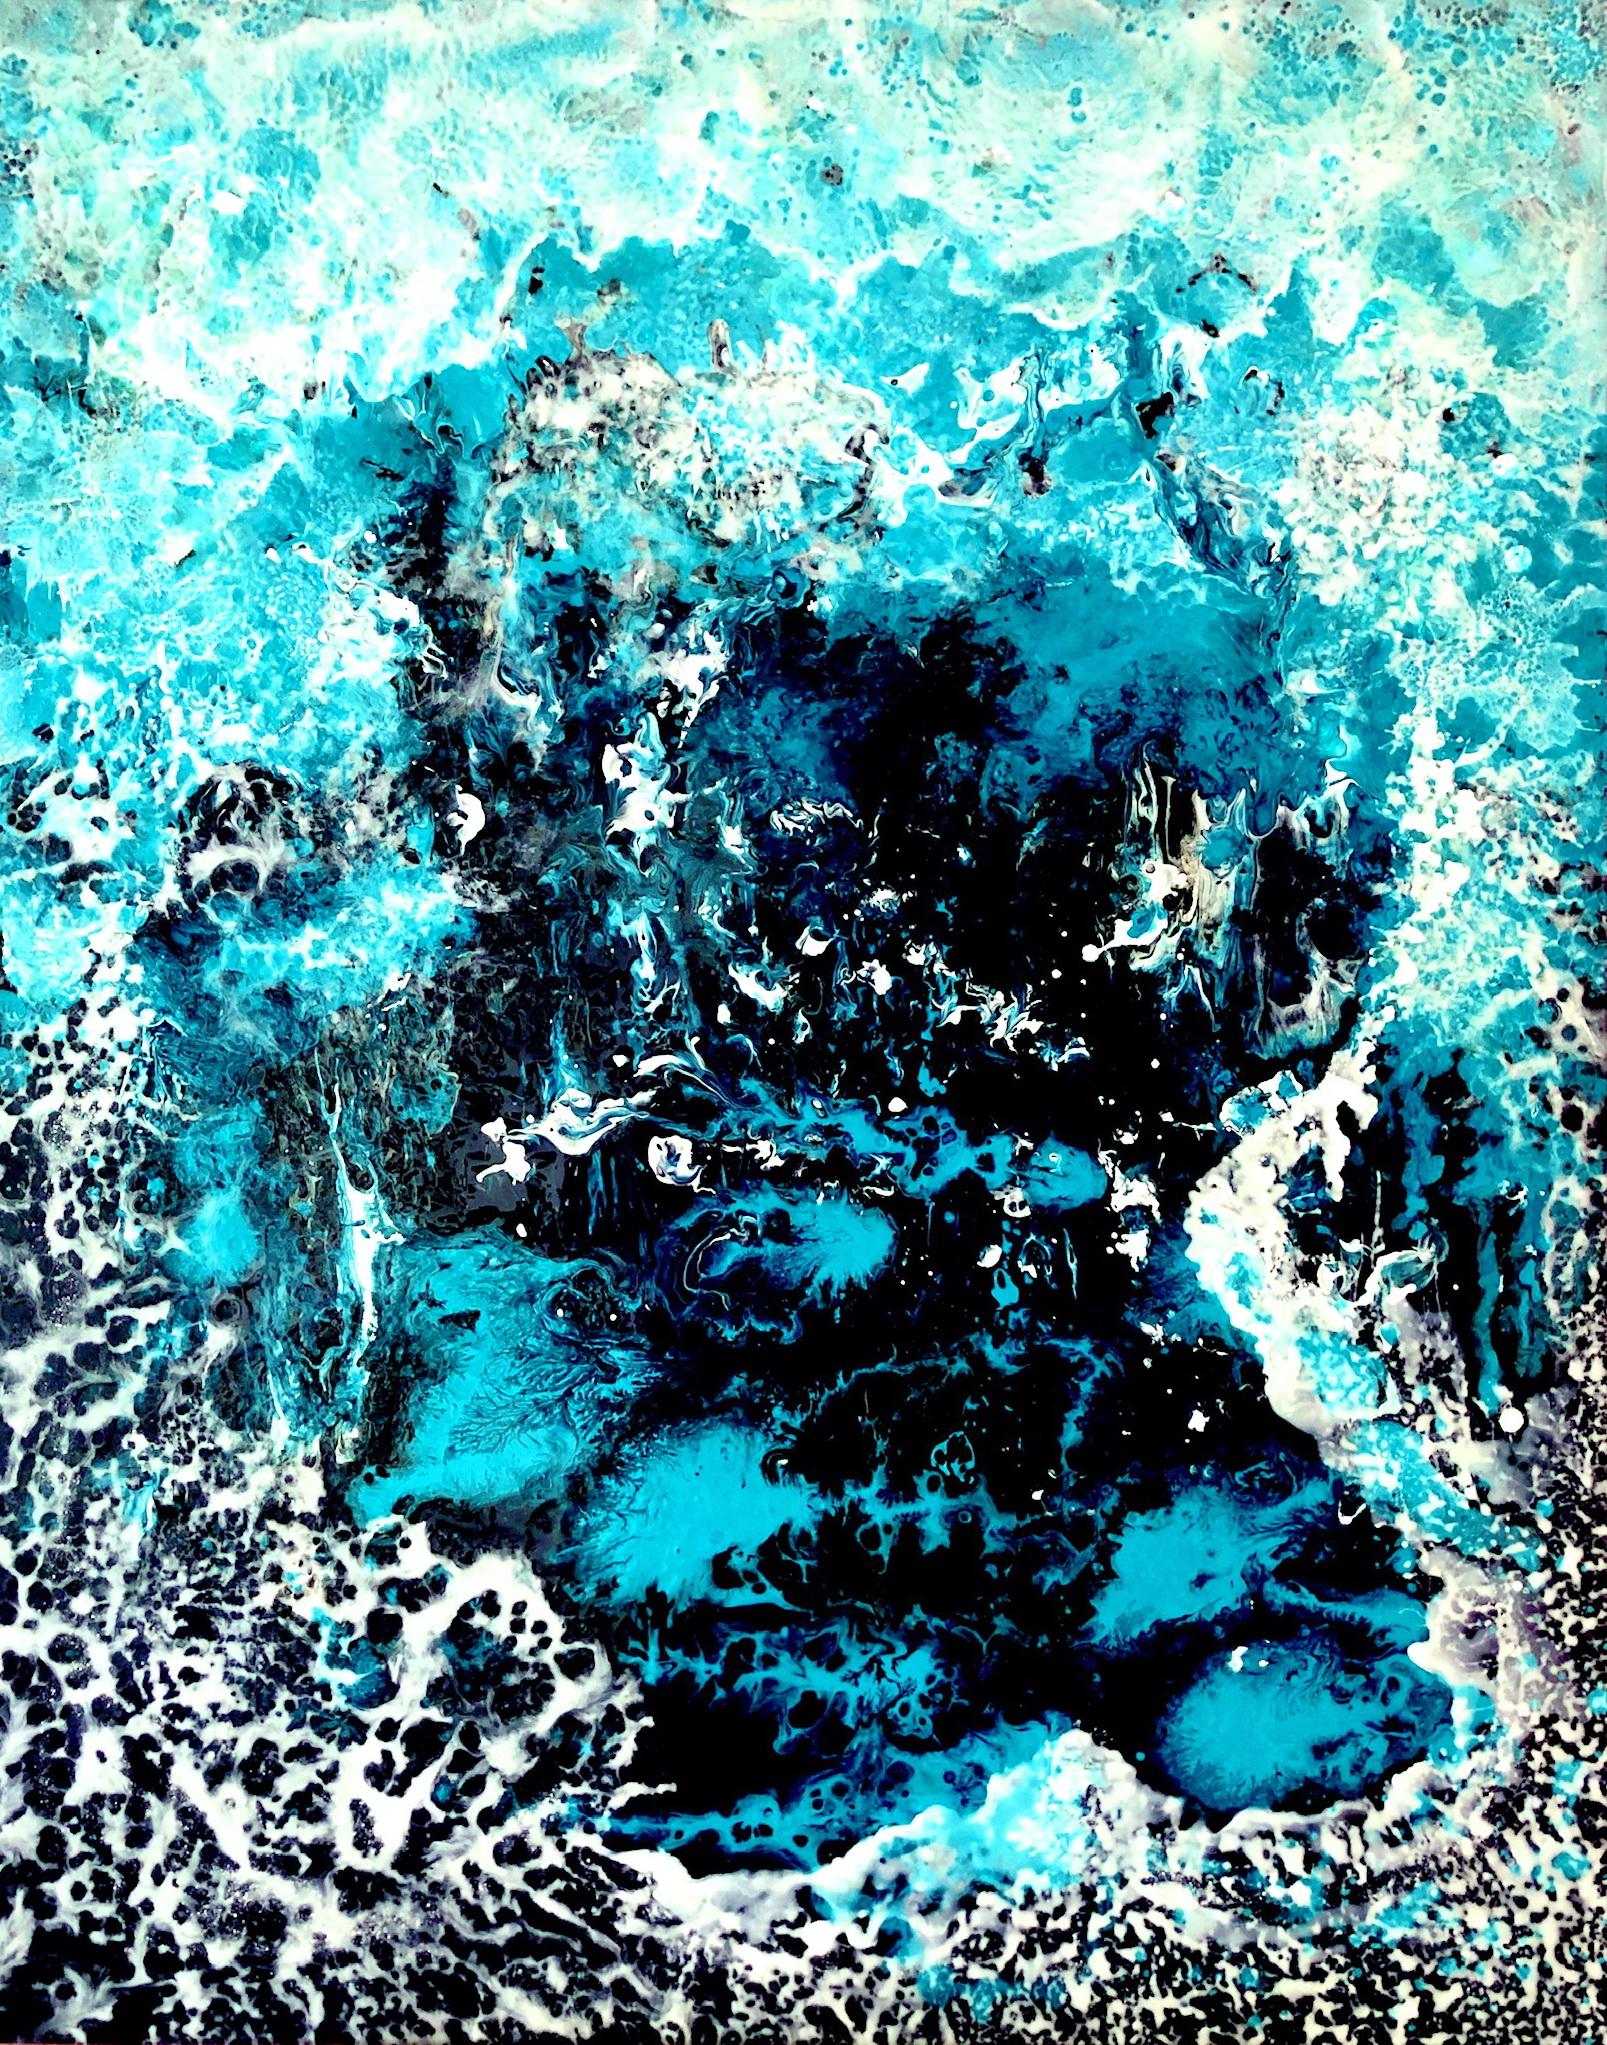 Looking into the Depth. Abstract Lage painting / Water/ Sea / Blue / White  - Abstract Expressionist Painting by Vik Schroeder 